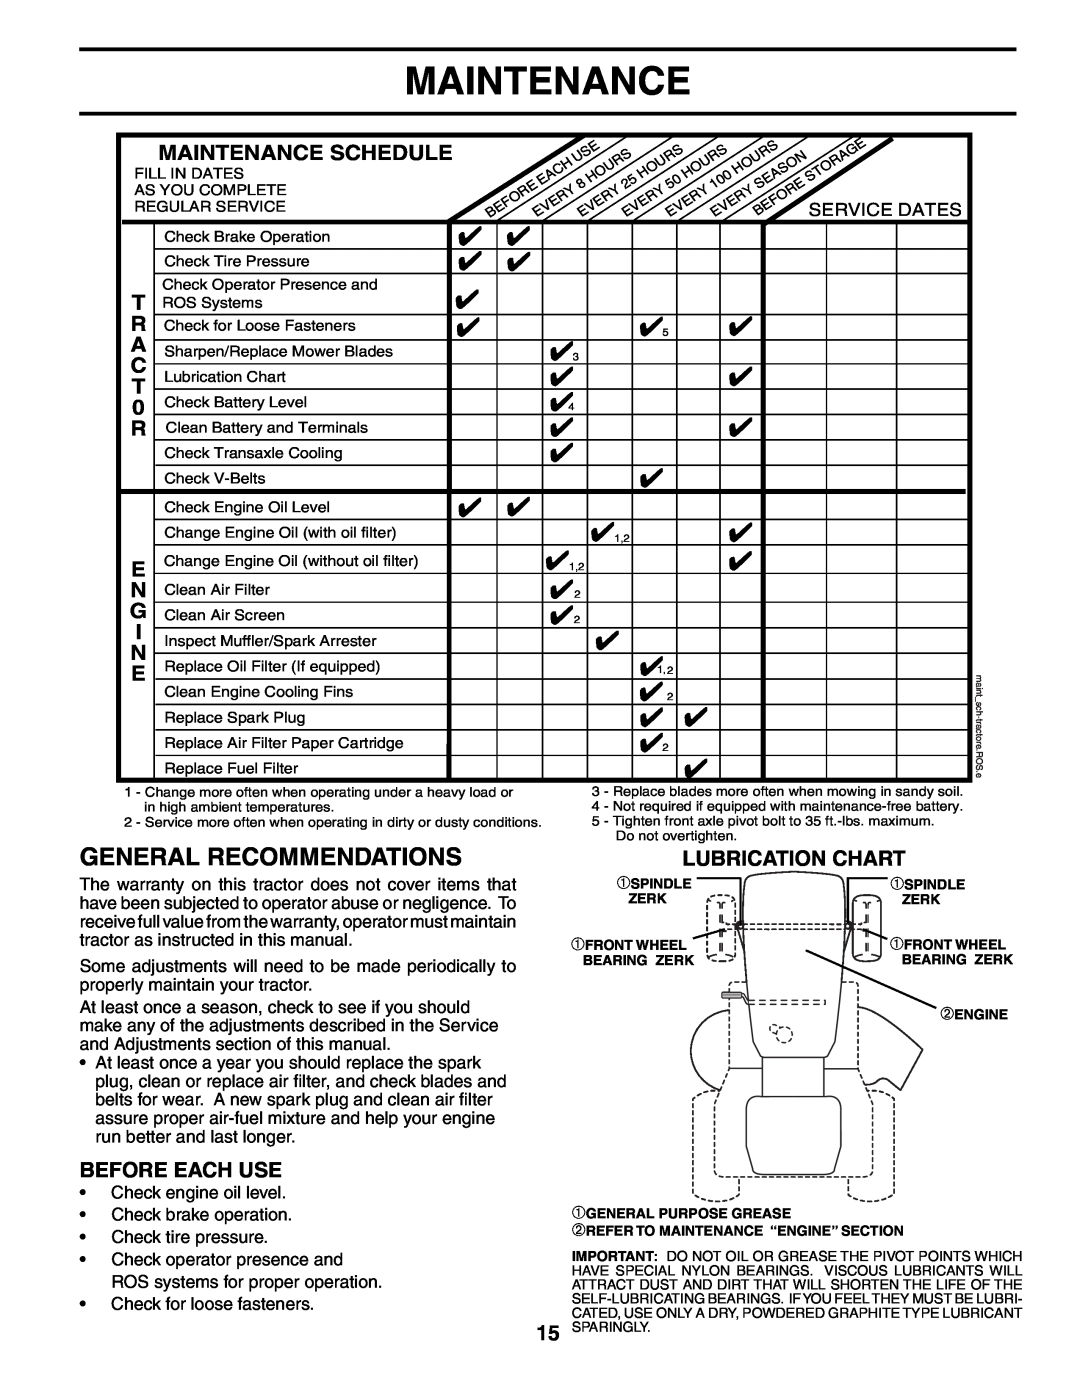 Poulan PK19H42LT manual General Recommendations, Maintenance Schedule, Lubrication Chart, Before Each Use 